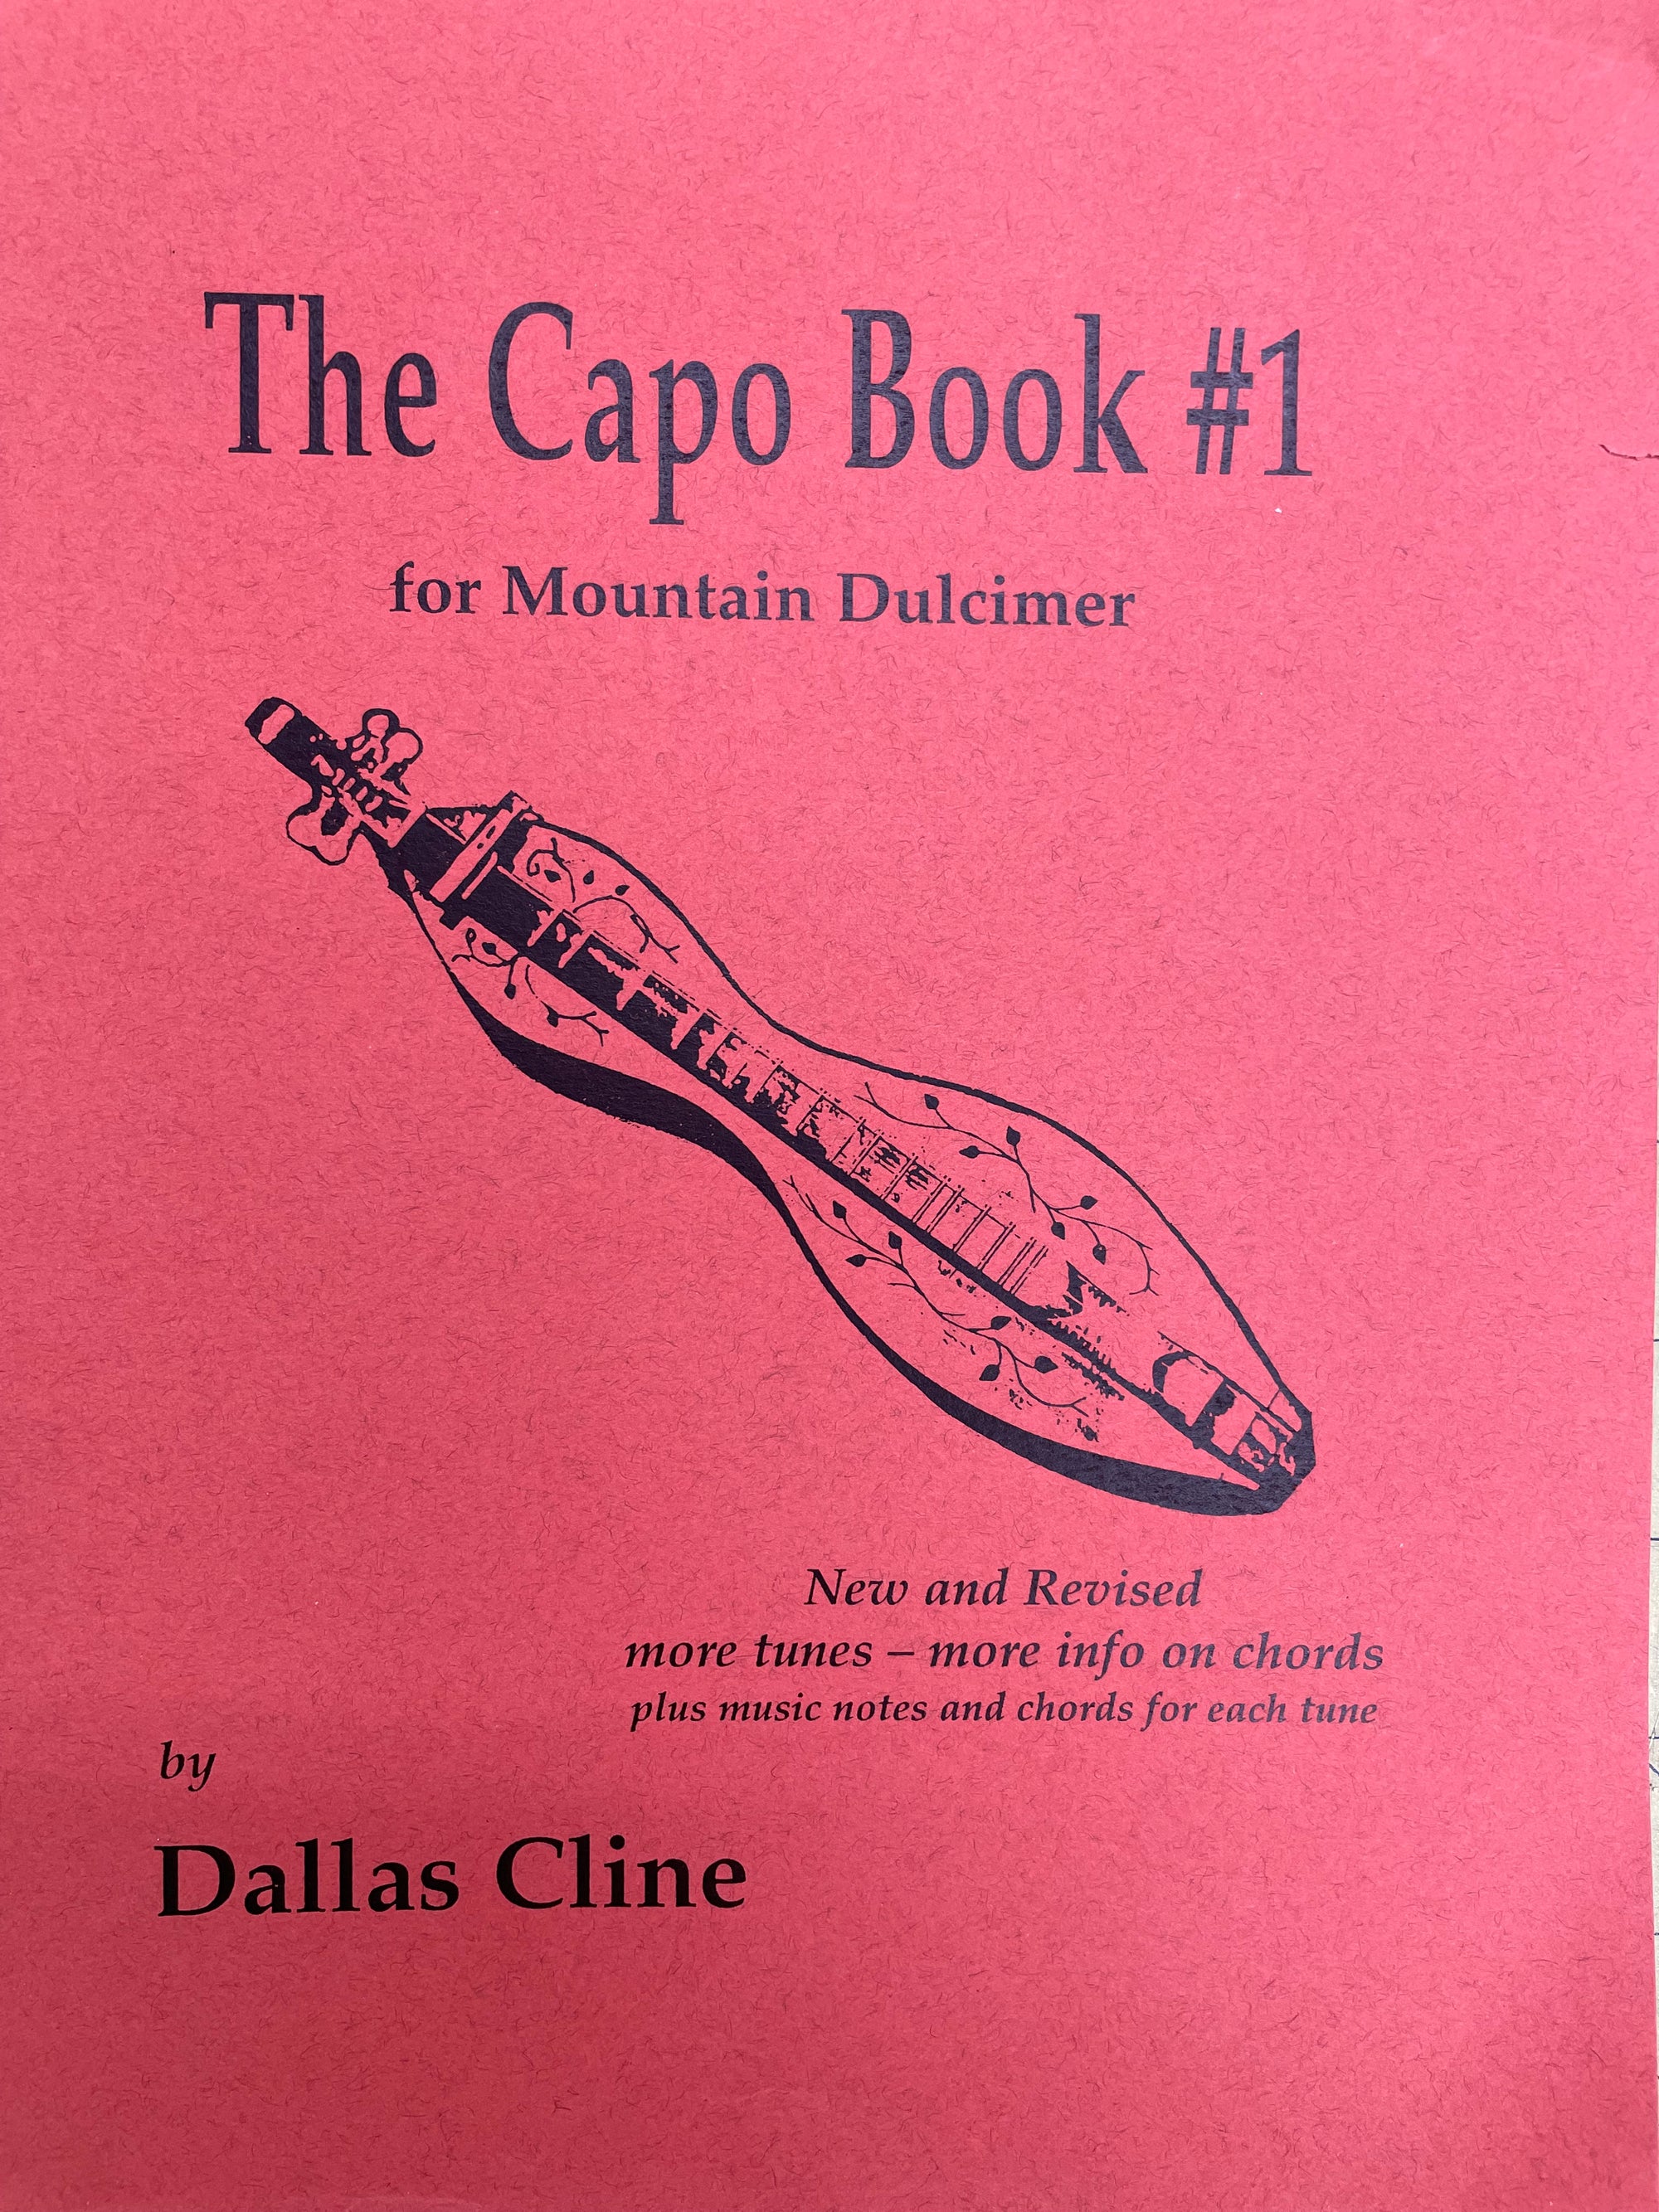 Cover of "The Capo Book #1 for Mountain Dulcimer" by Dallas Cline, featuring an illustration of a capo on a pink background.